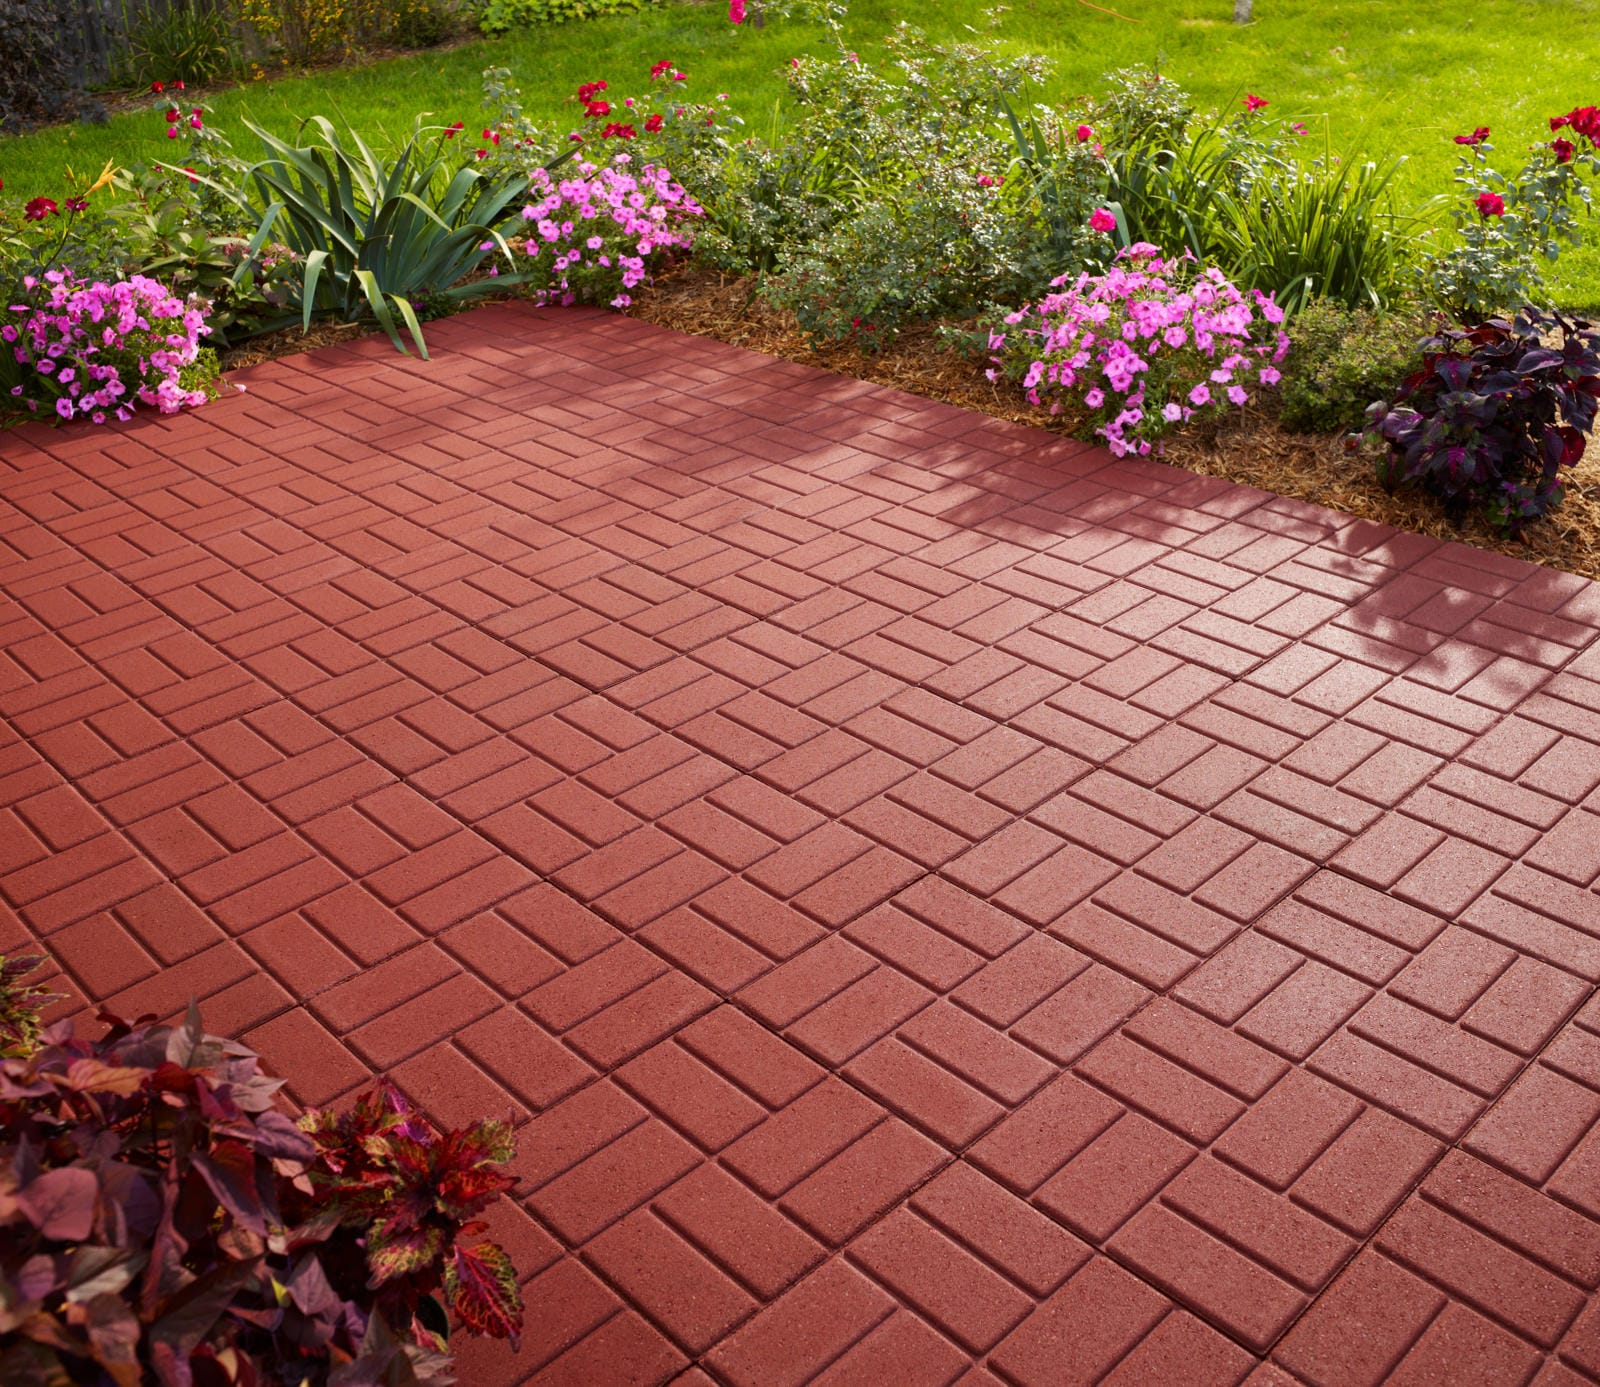 Maryland Decking Paver Patio Construction Company Near Me Maple Lawn Md